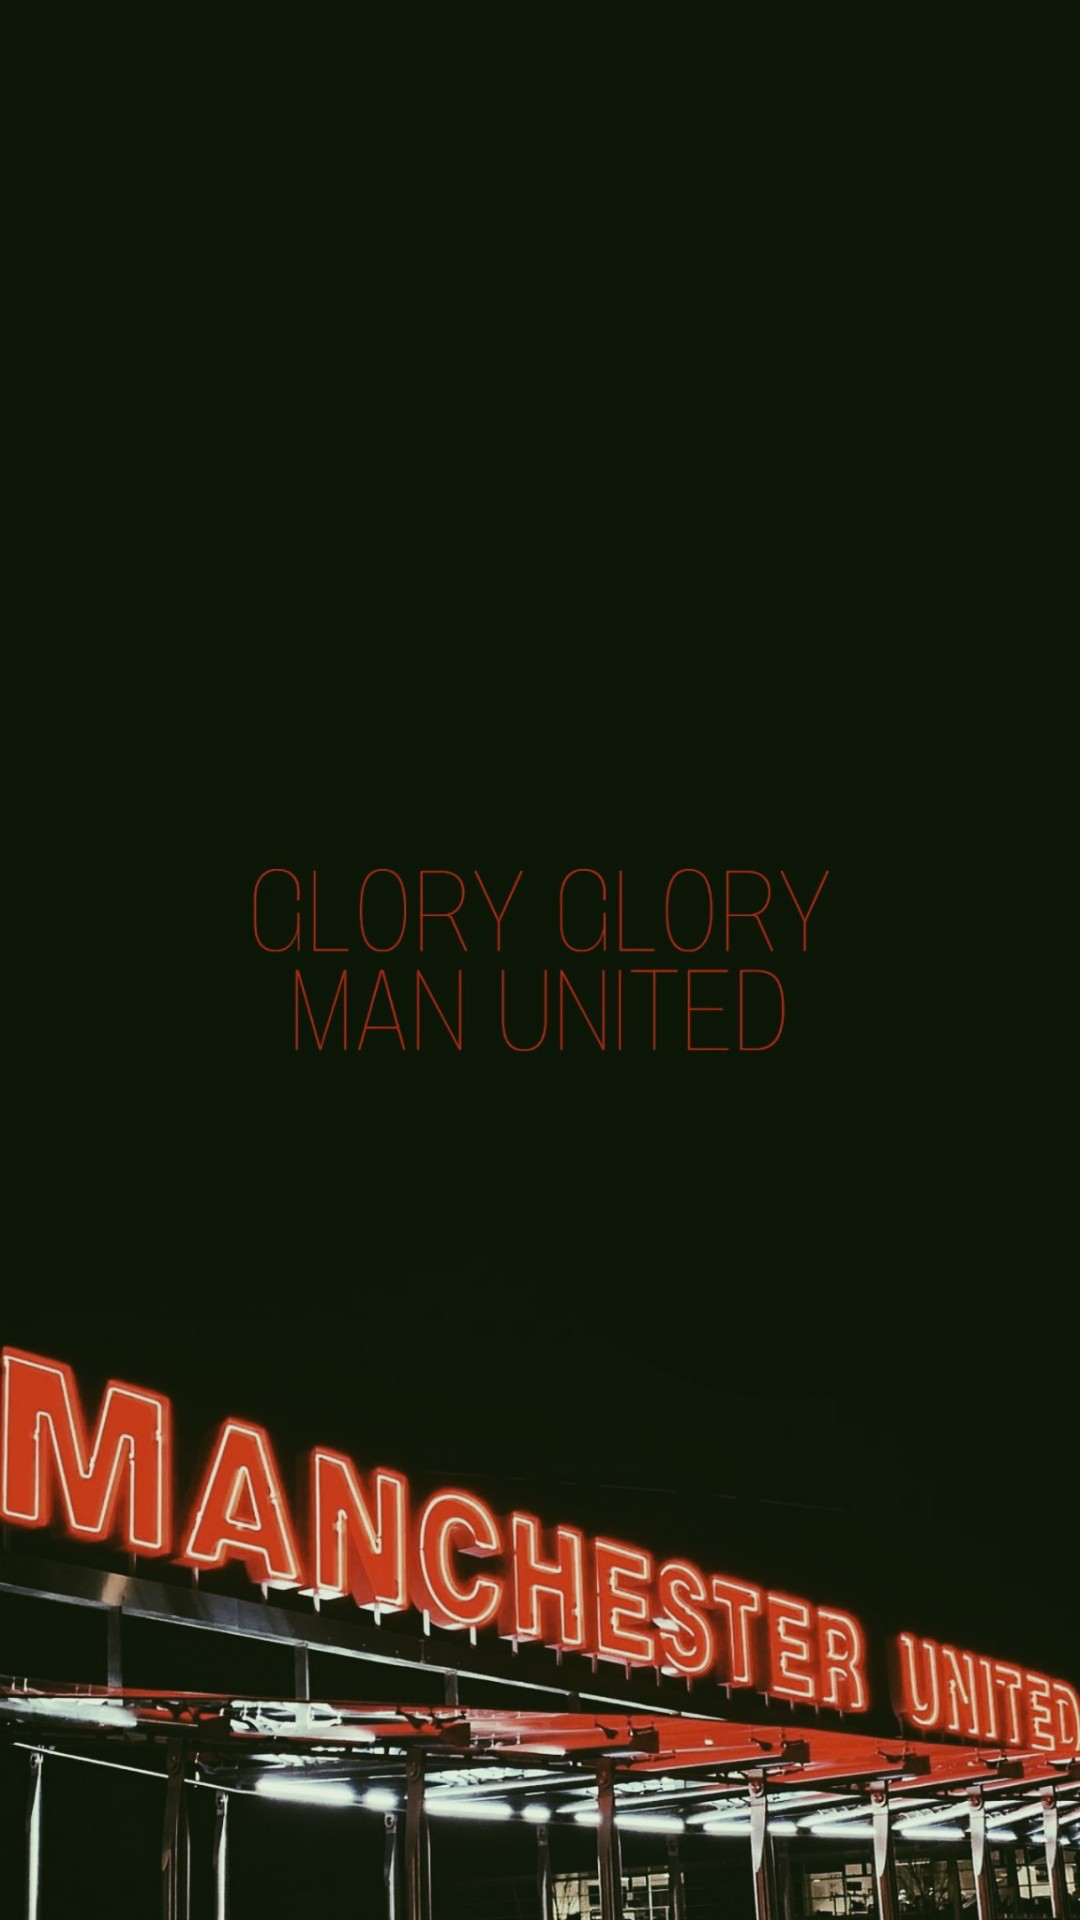 manchester united wallpaper. Manchester united wallpaper, Manchester united, Manchester united team